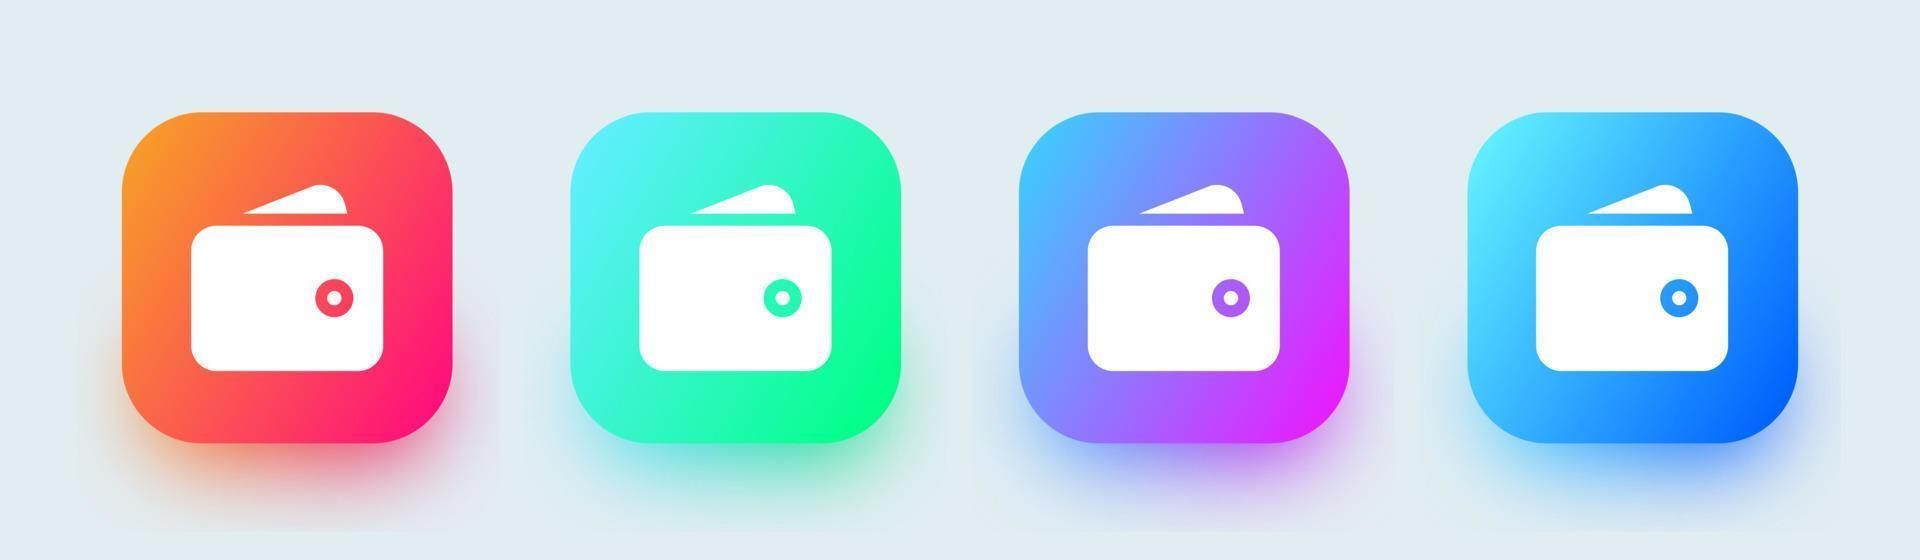 Wallet solid icon in square gradient colors. Finance signs vector illustration.